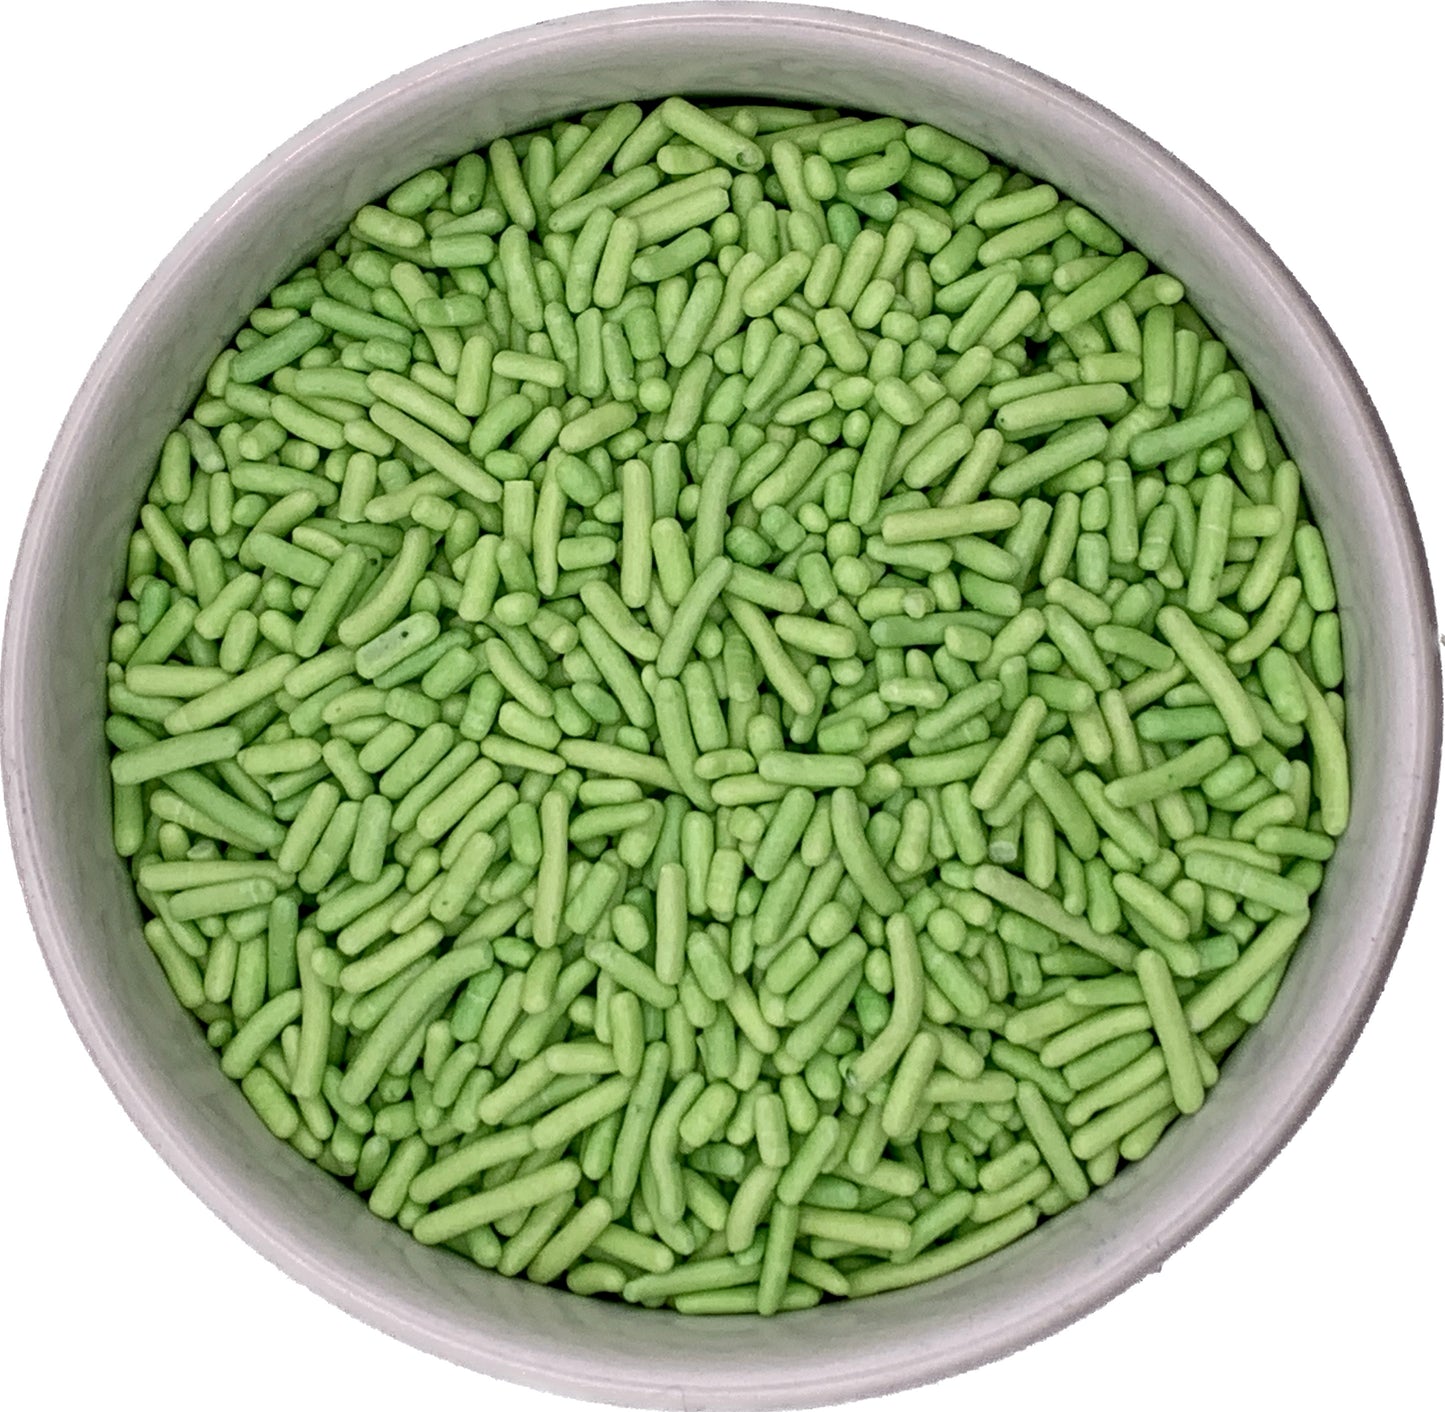 Lime Green Jimmies Sprinkles in a Bowl